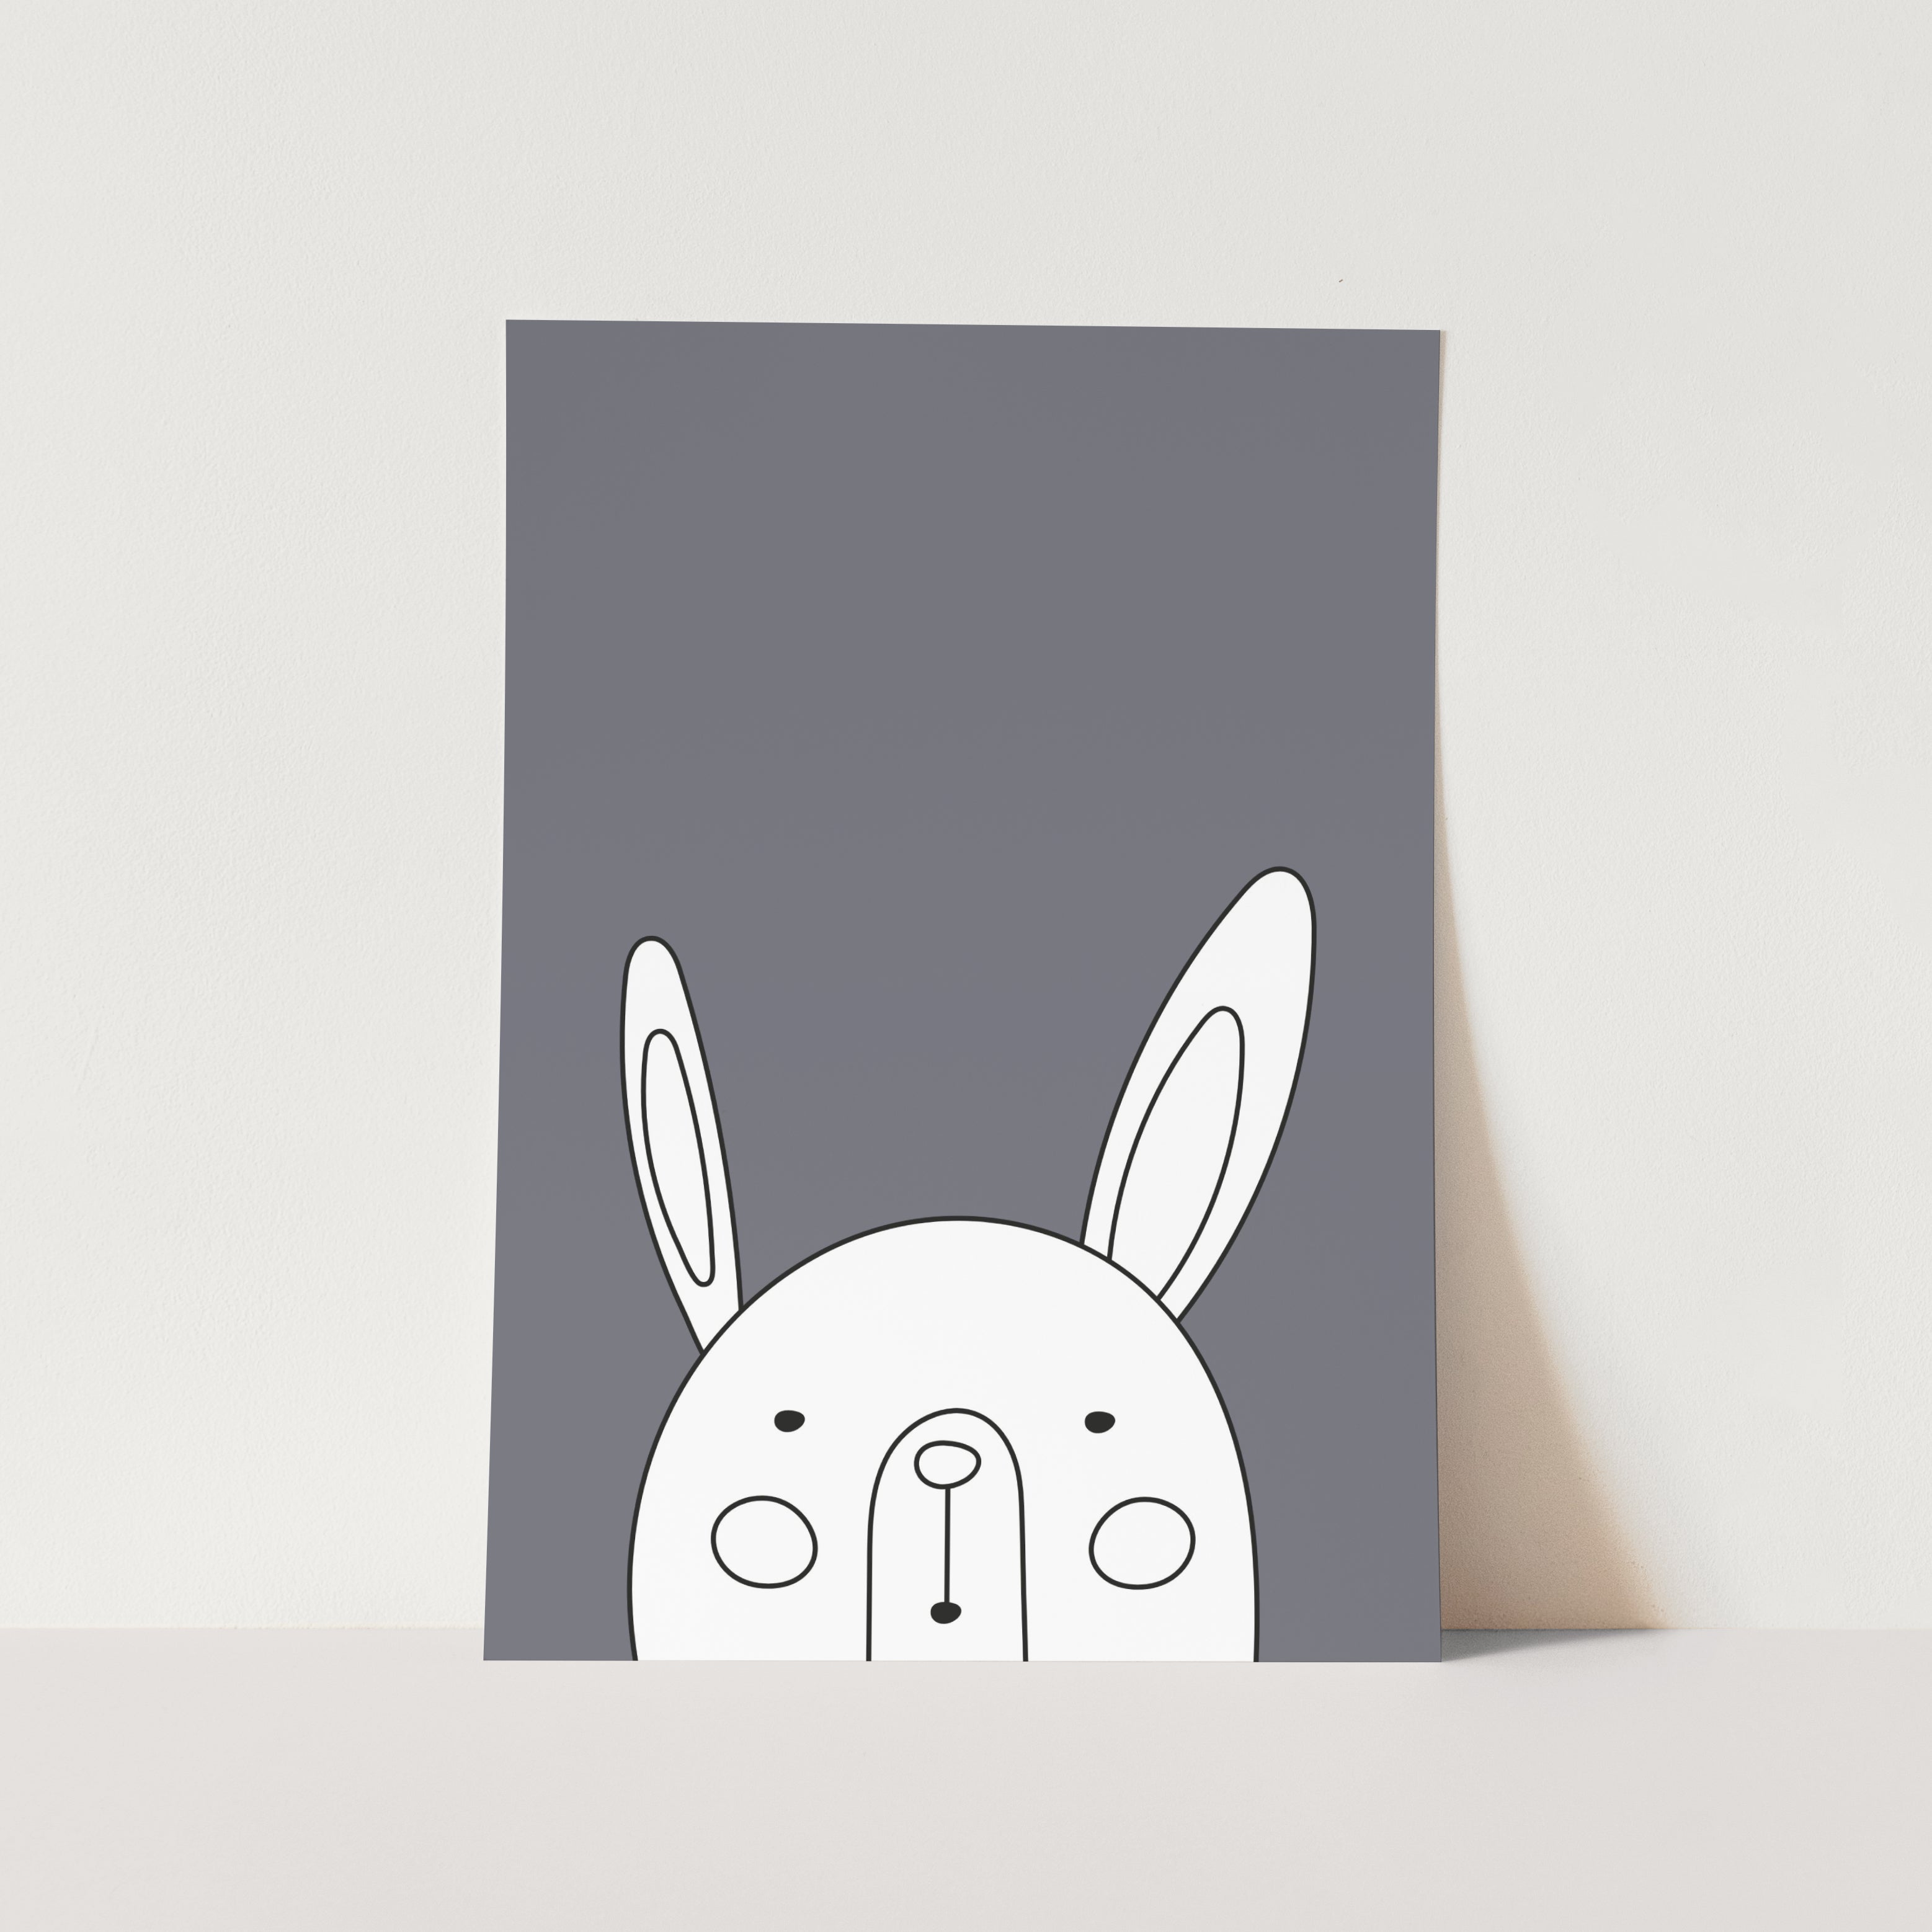 Visual Echoes™ DIY Rabbit Design Colouring Kit Little Art Gallery - MDF  Board with Drawing Outline, Essel, Water Color, and Paint Brushes. :  Amazon.in: Home & Kitchen